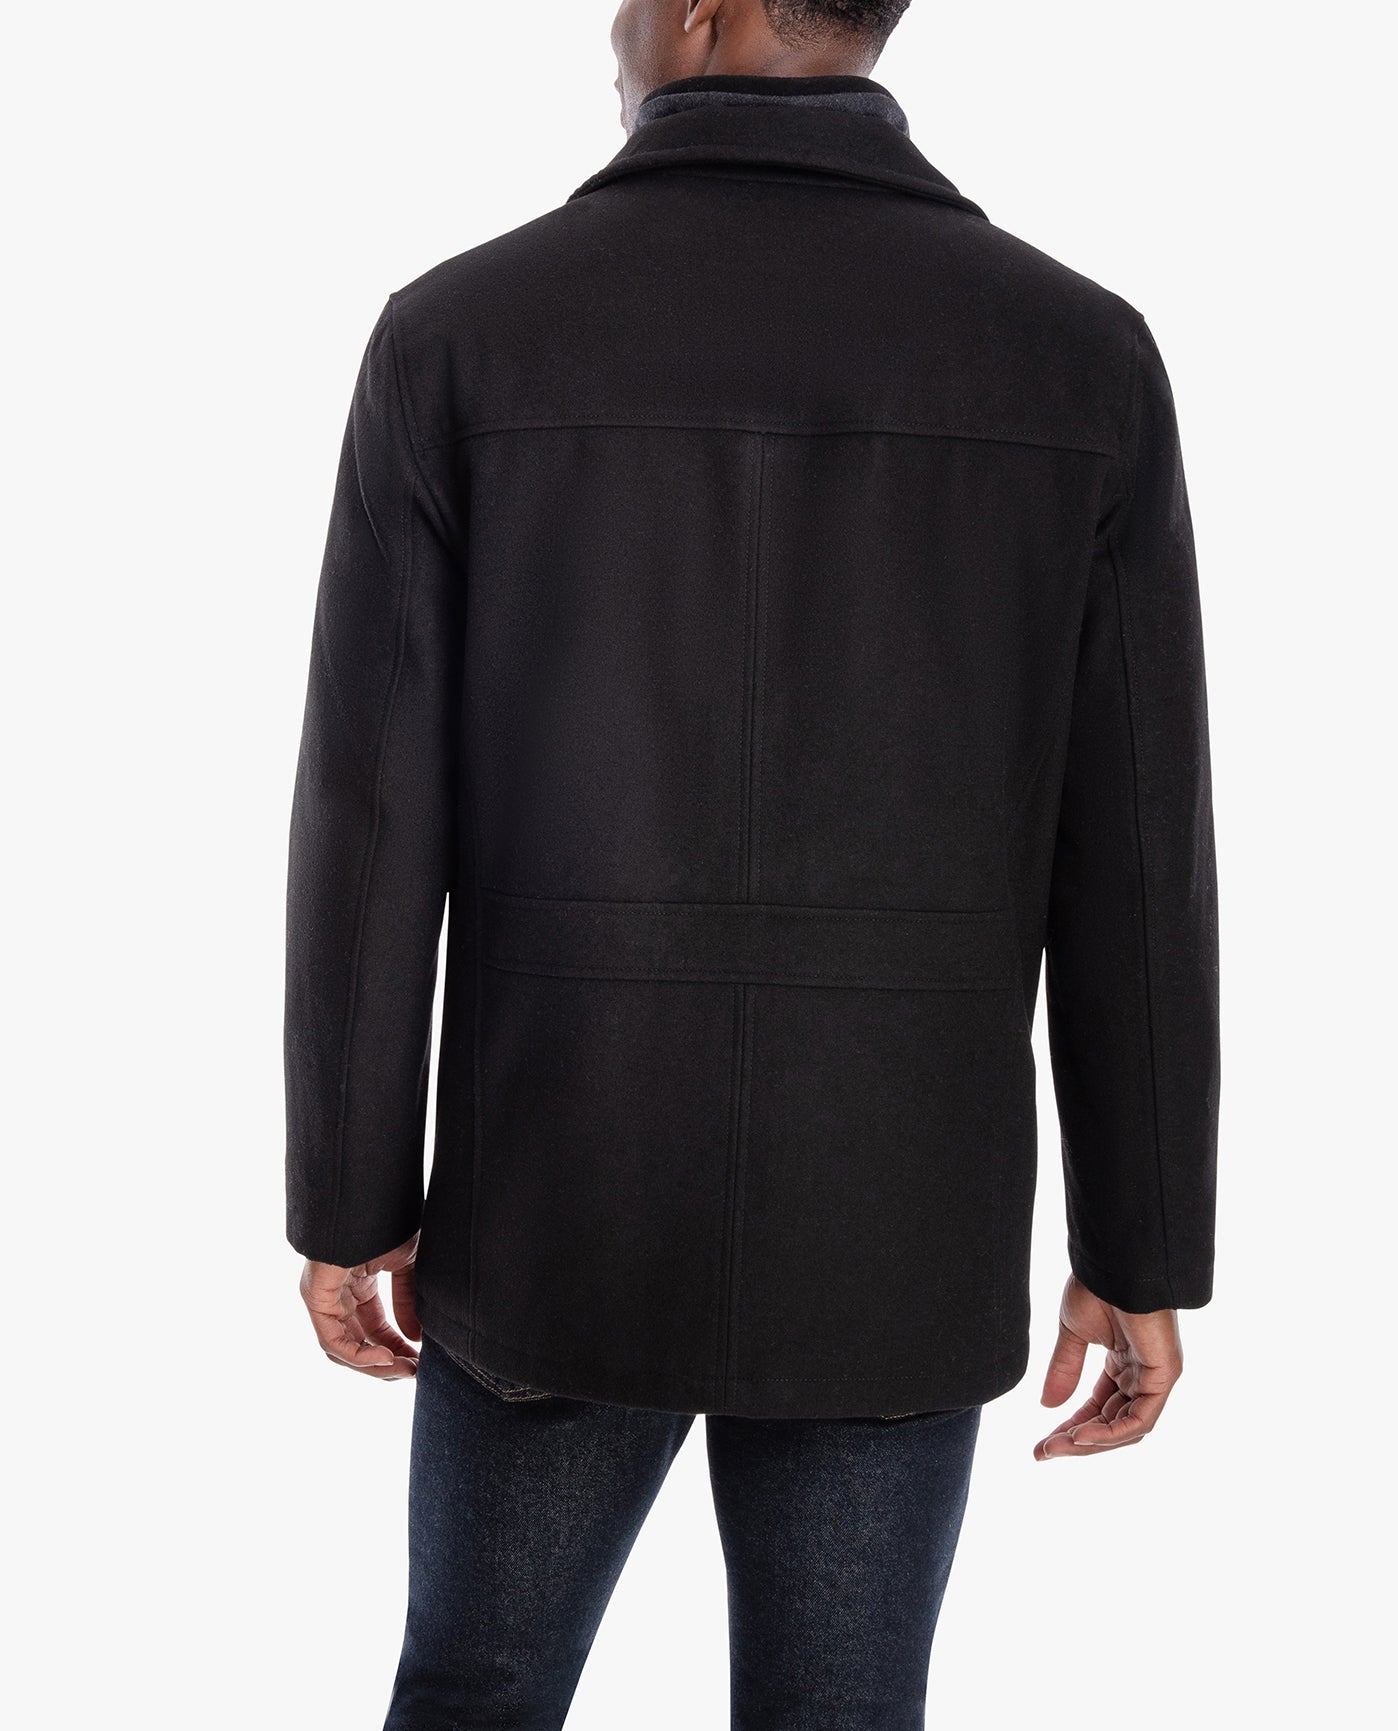 BACK VIEW OF AMHERST BUTTON FRONT WOOL JACKET | BLACK